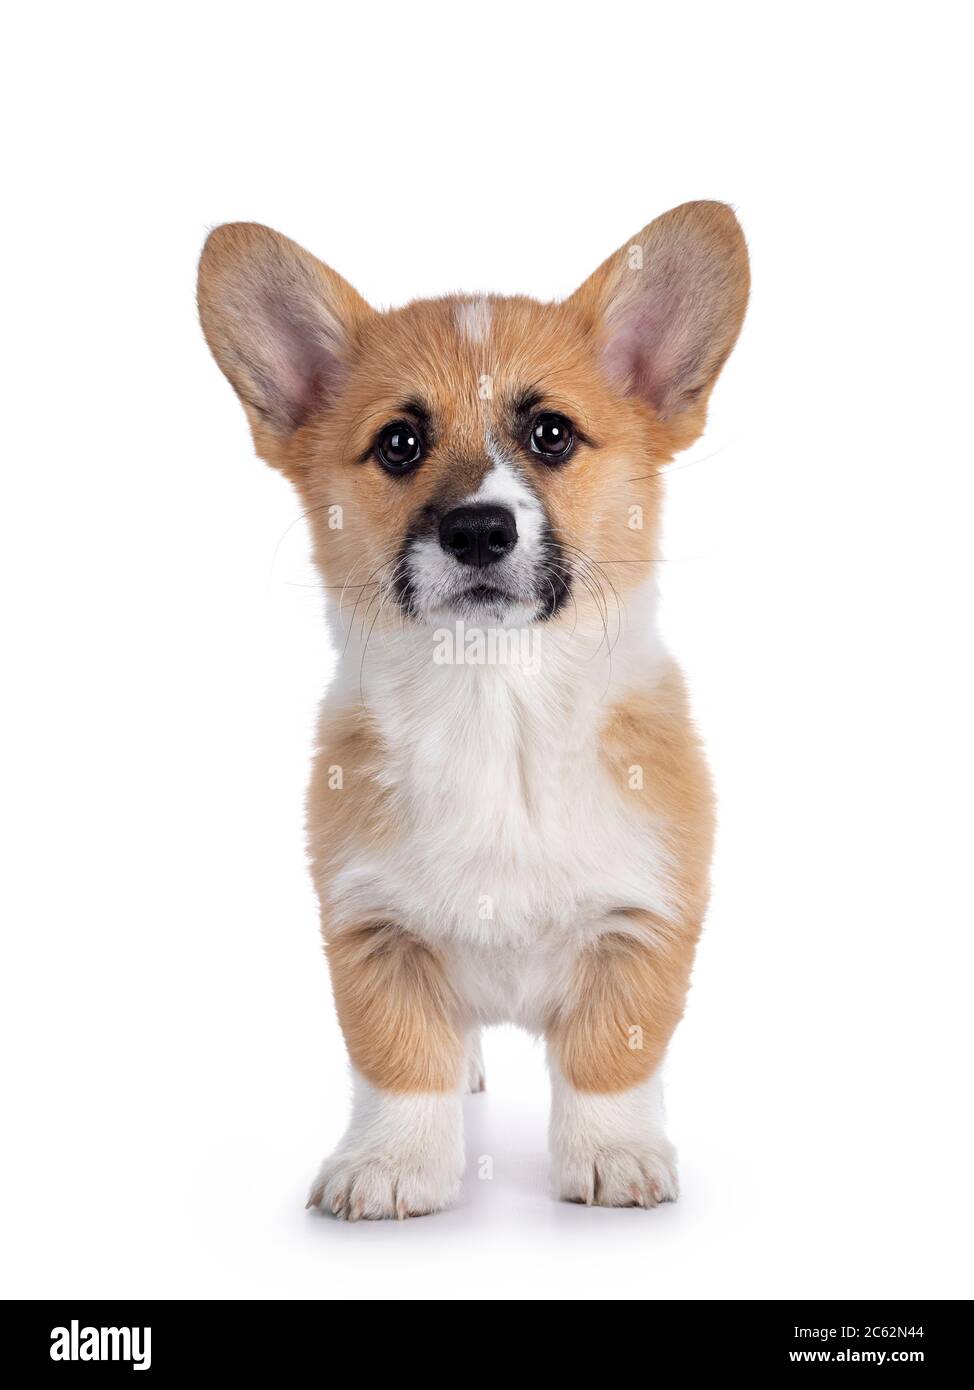 Adorable Welsh Corgi Pembroke dog puppy, standing facing front. looking straight to camera with shiny eyes. Isolated on white background. Stock Photo